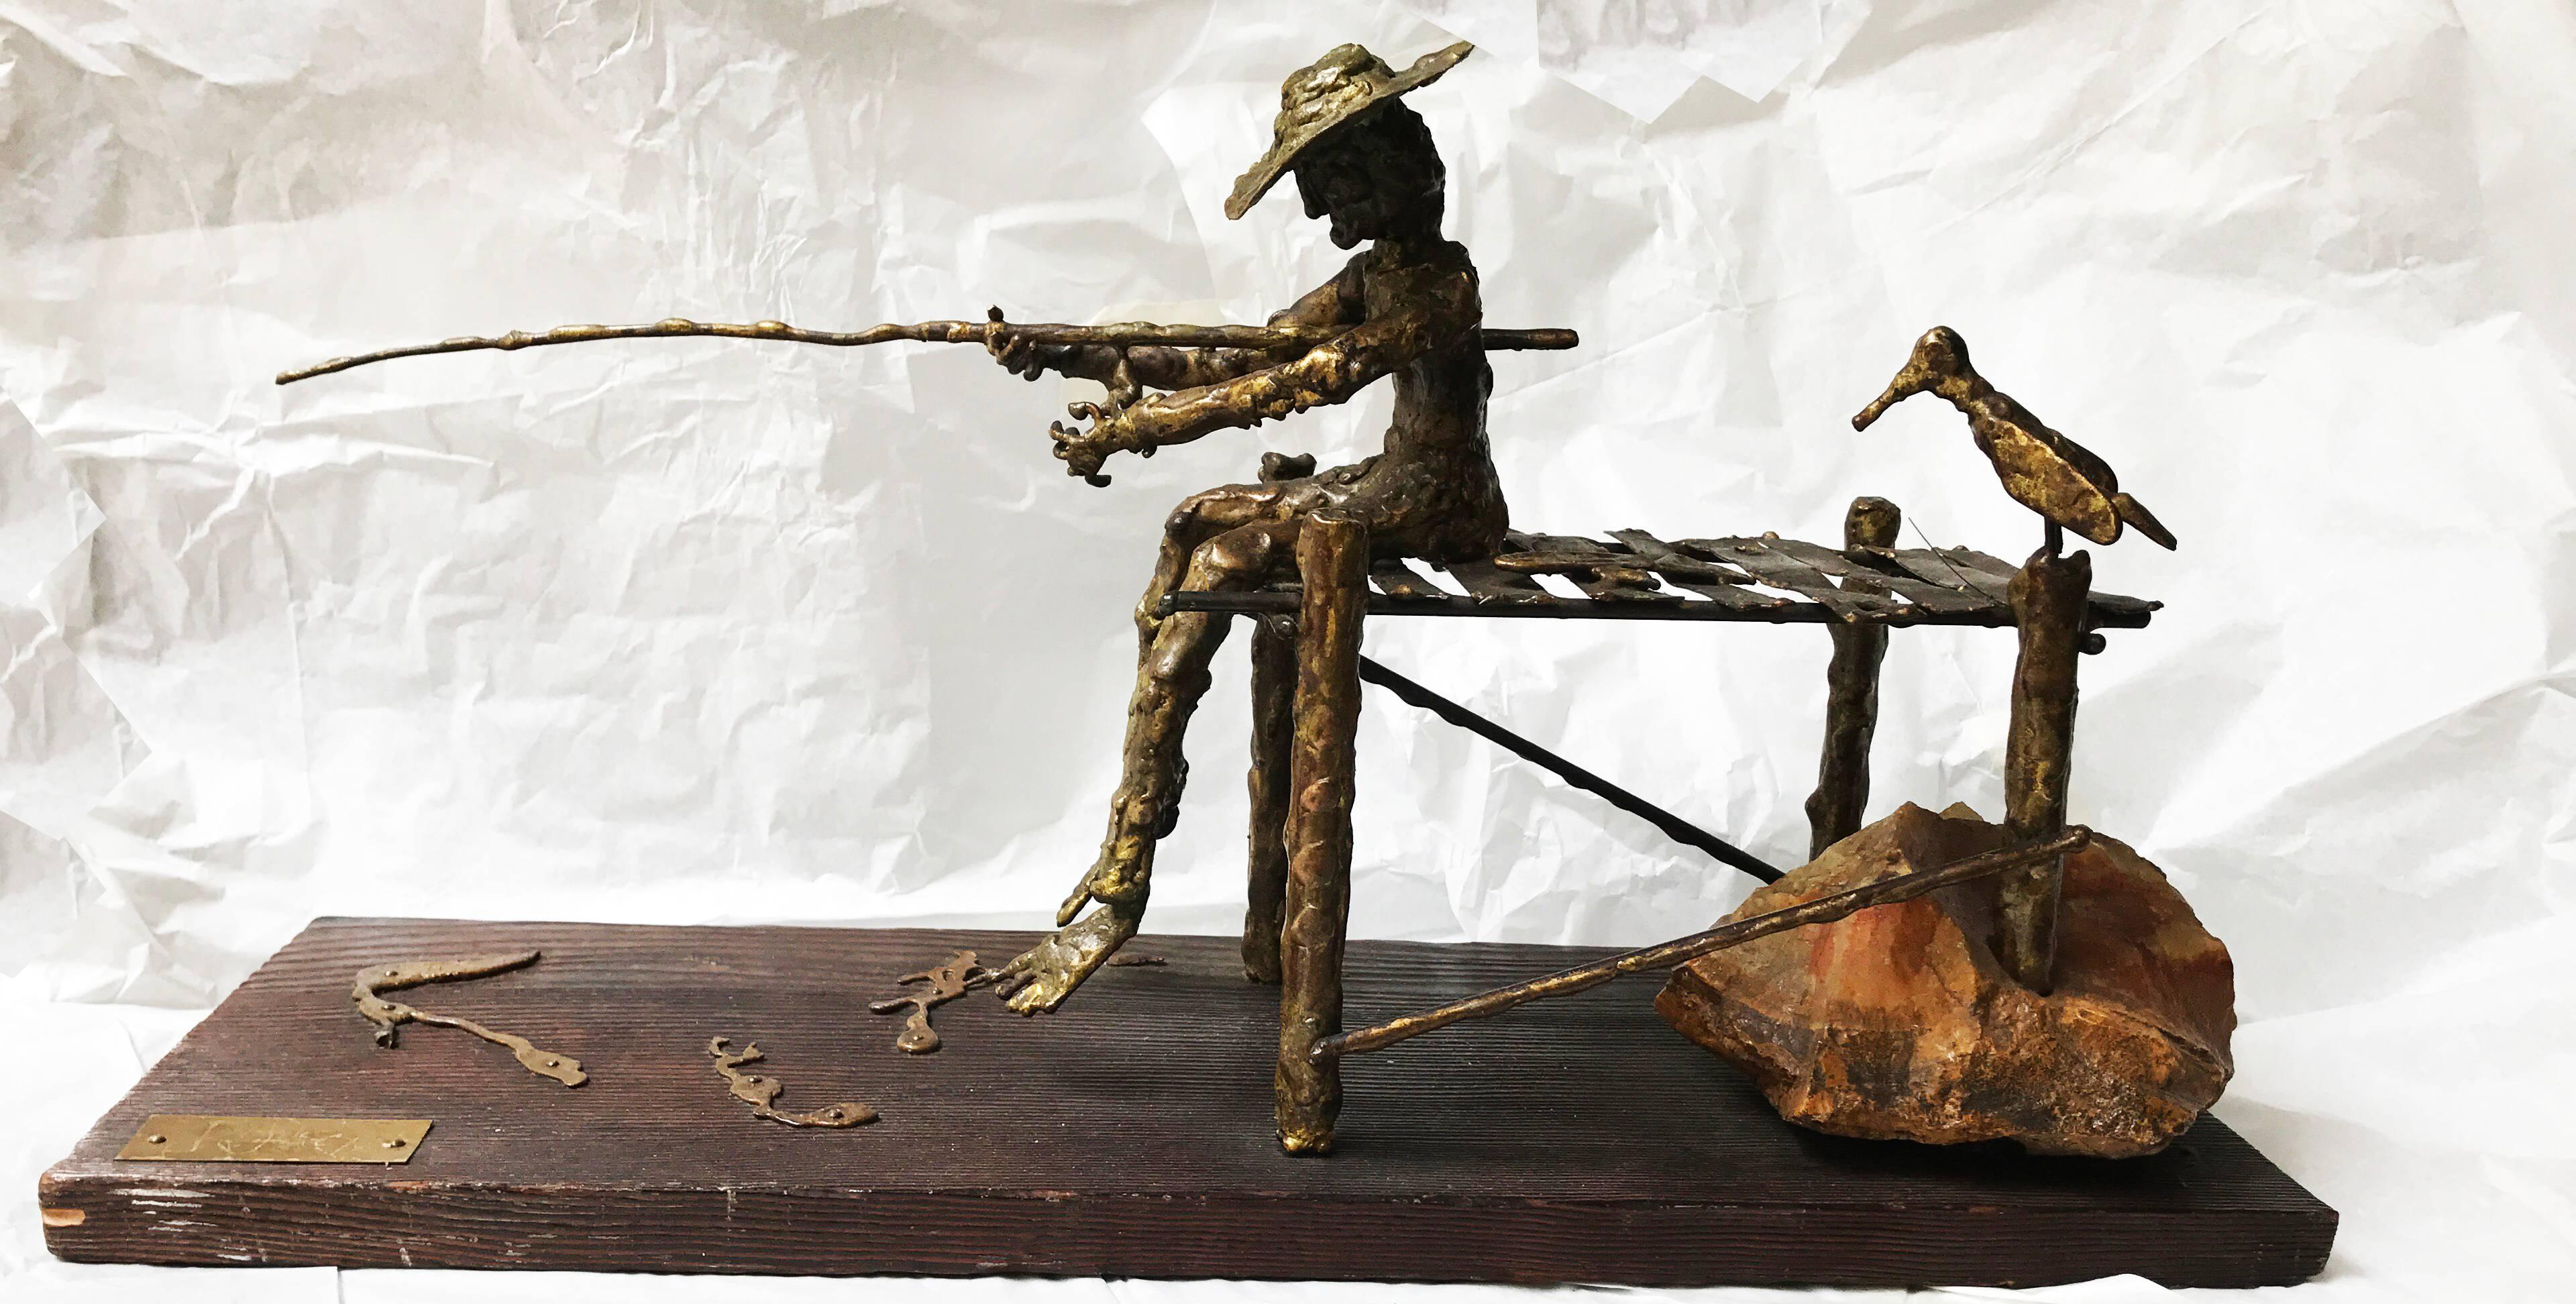 signed illegibly; Fisherman and Bird; bronze, wood, rock For Sale 3